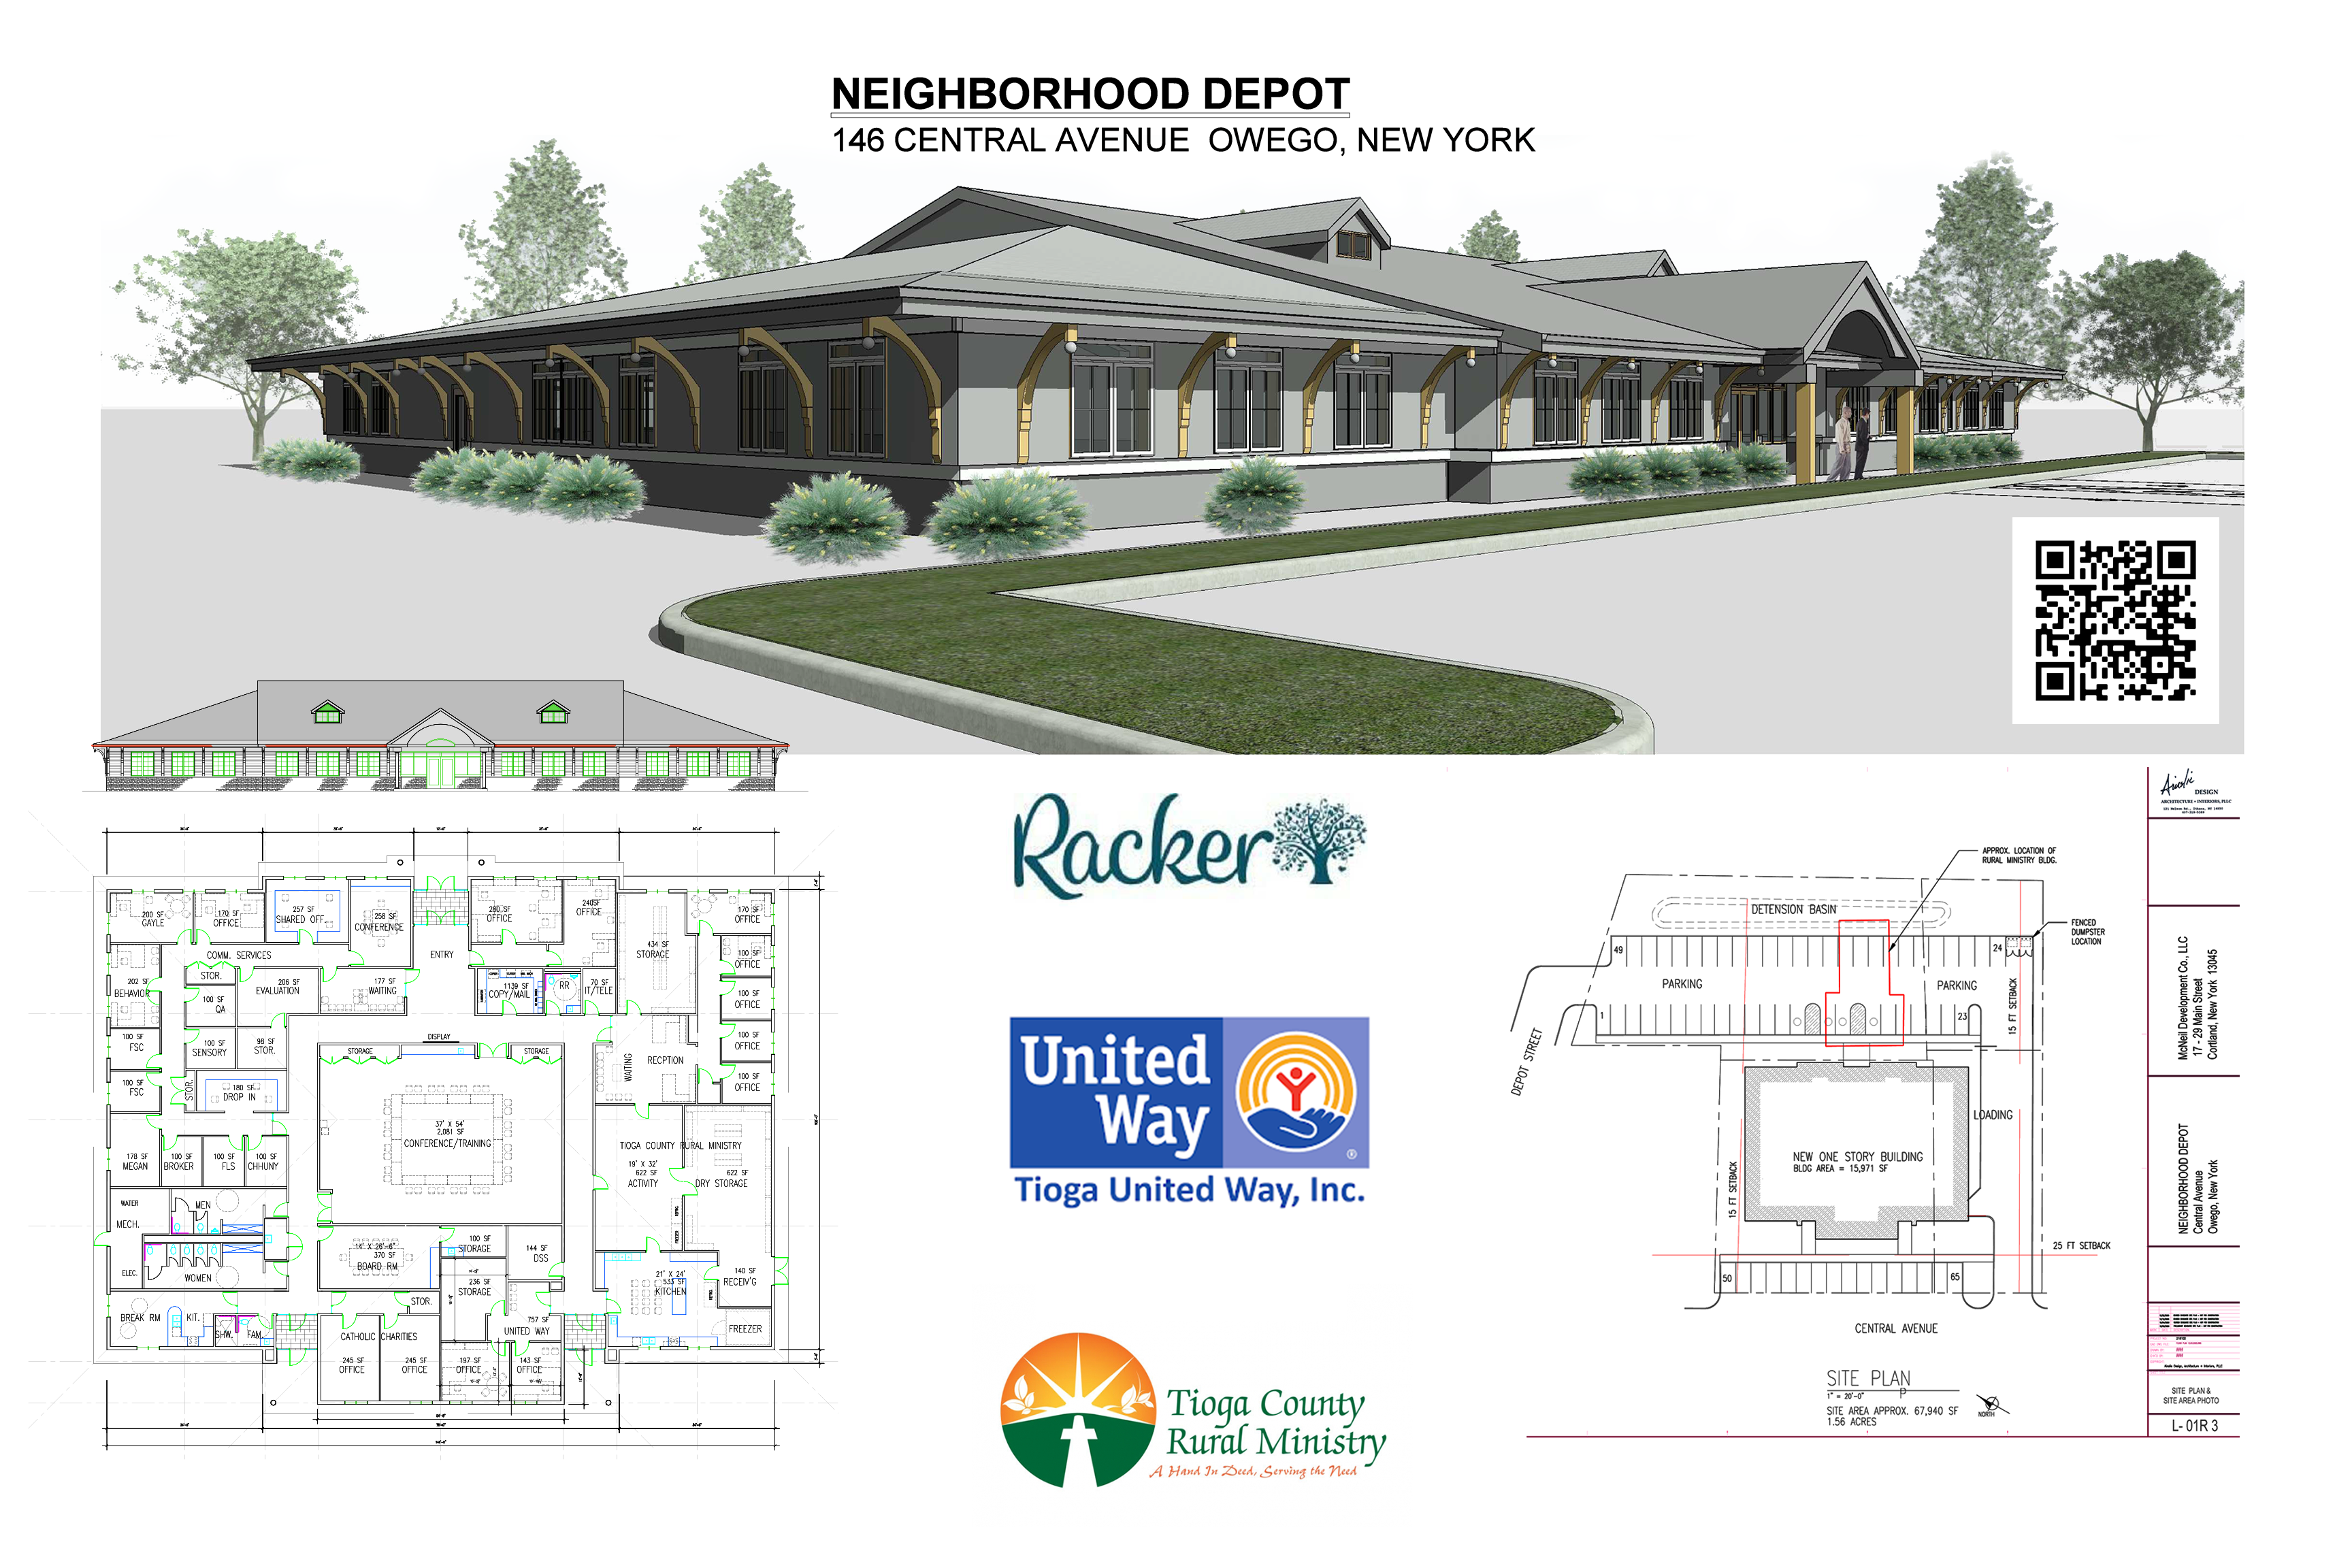 A rendering of the completed building with schematics and logos of each of the participating not-for-profit organizations